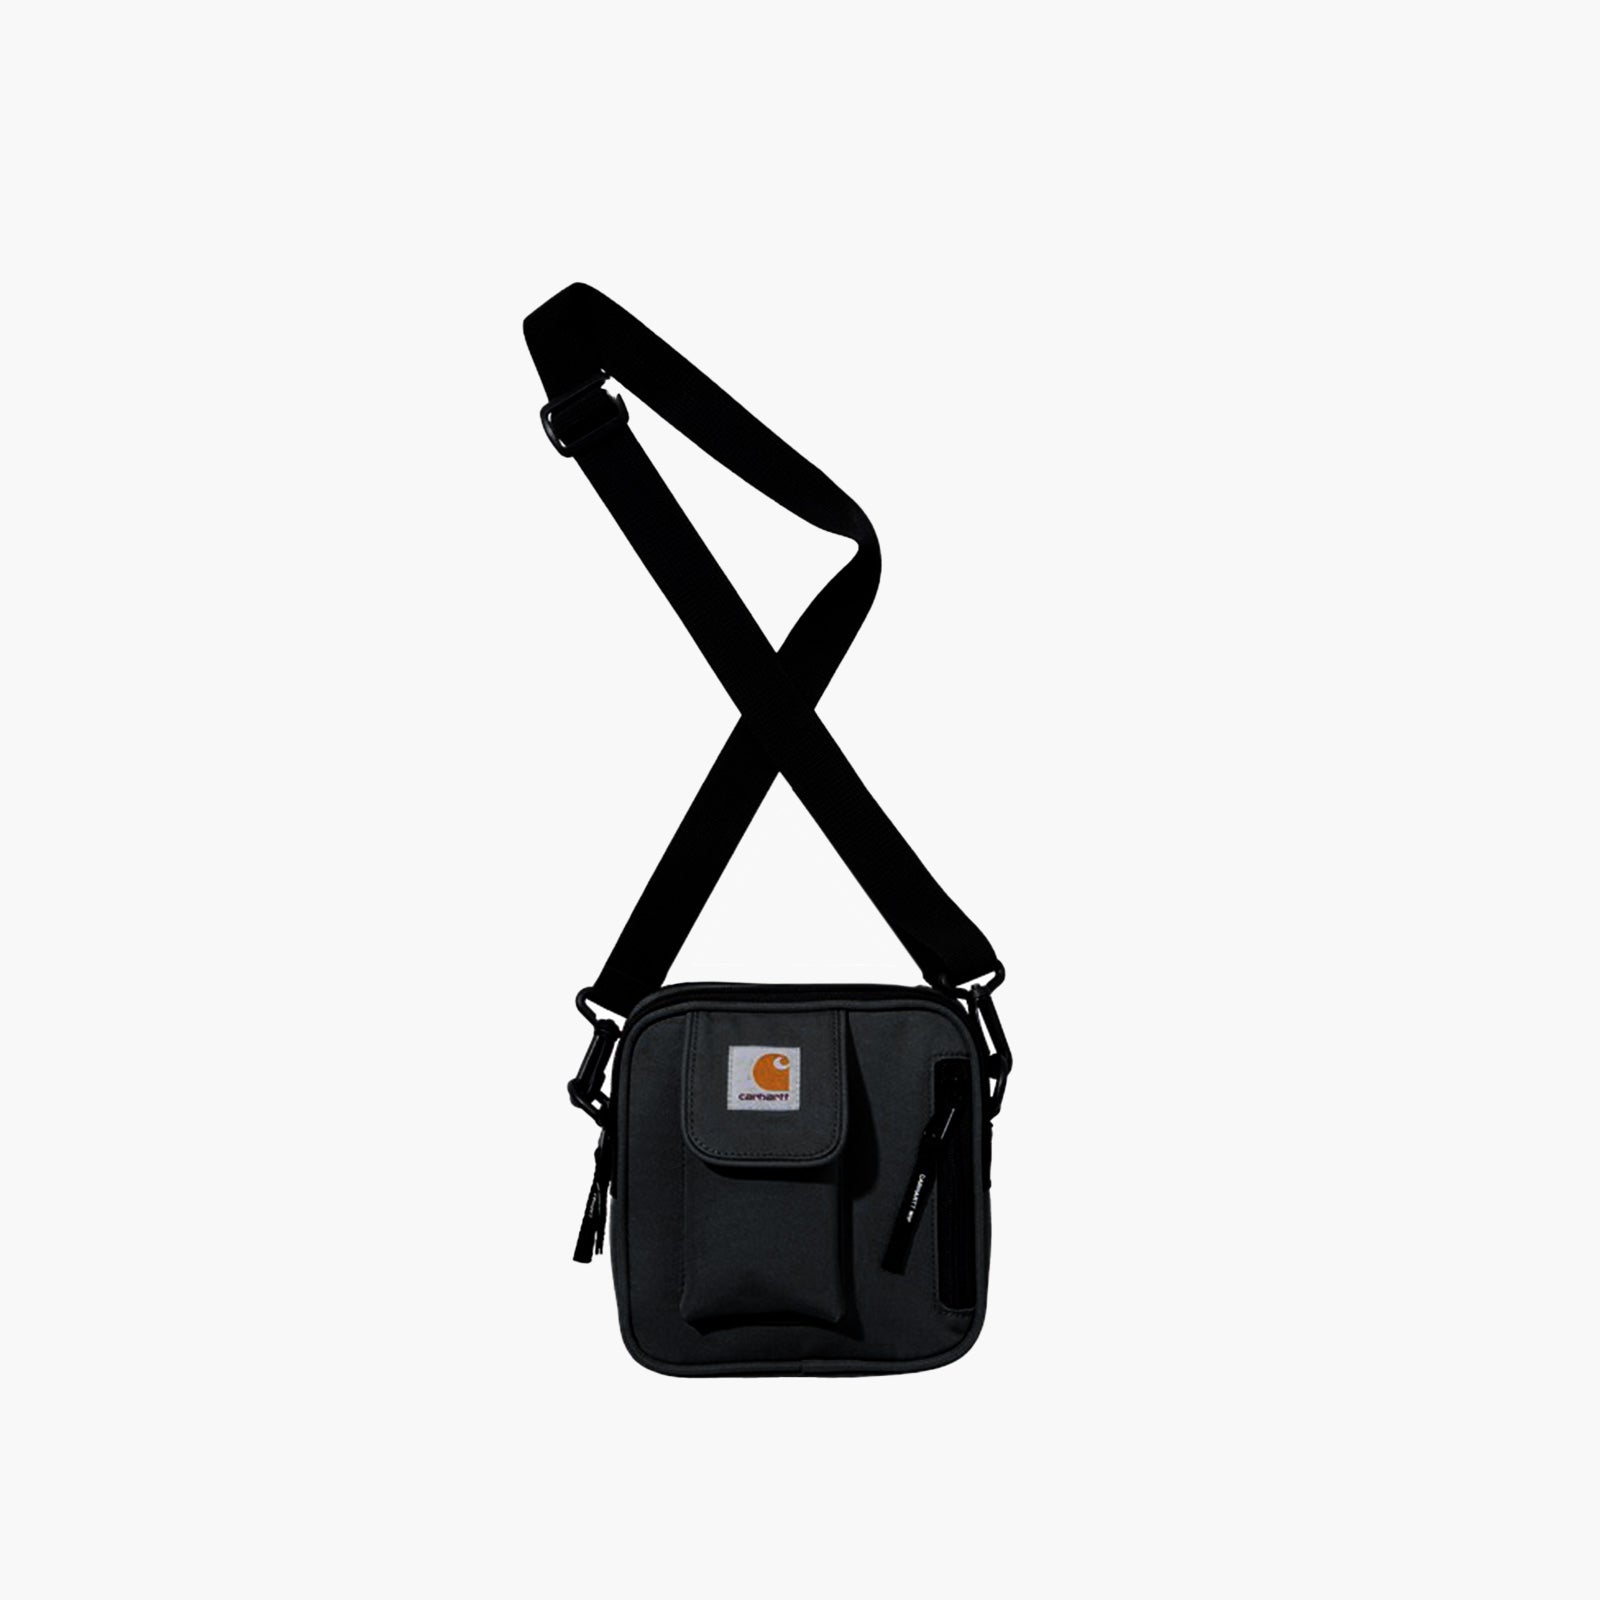 Carhartt WIP Essentials Bag Small-I031470 - 89.XX-Black-One Size-SUEDE Store